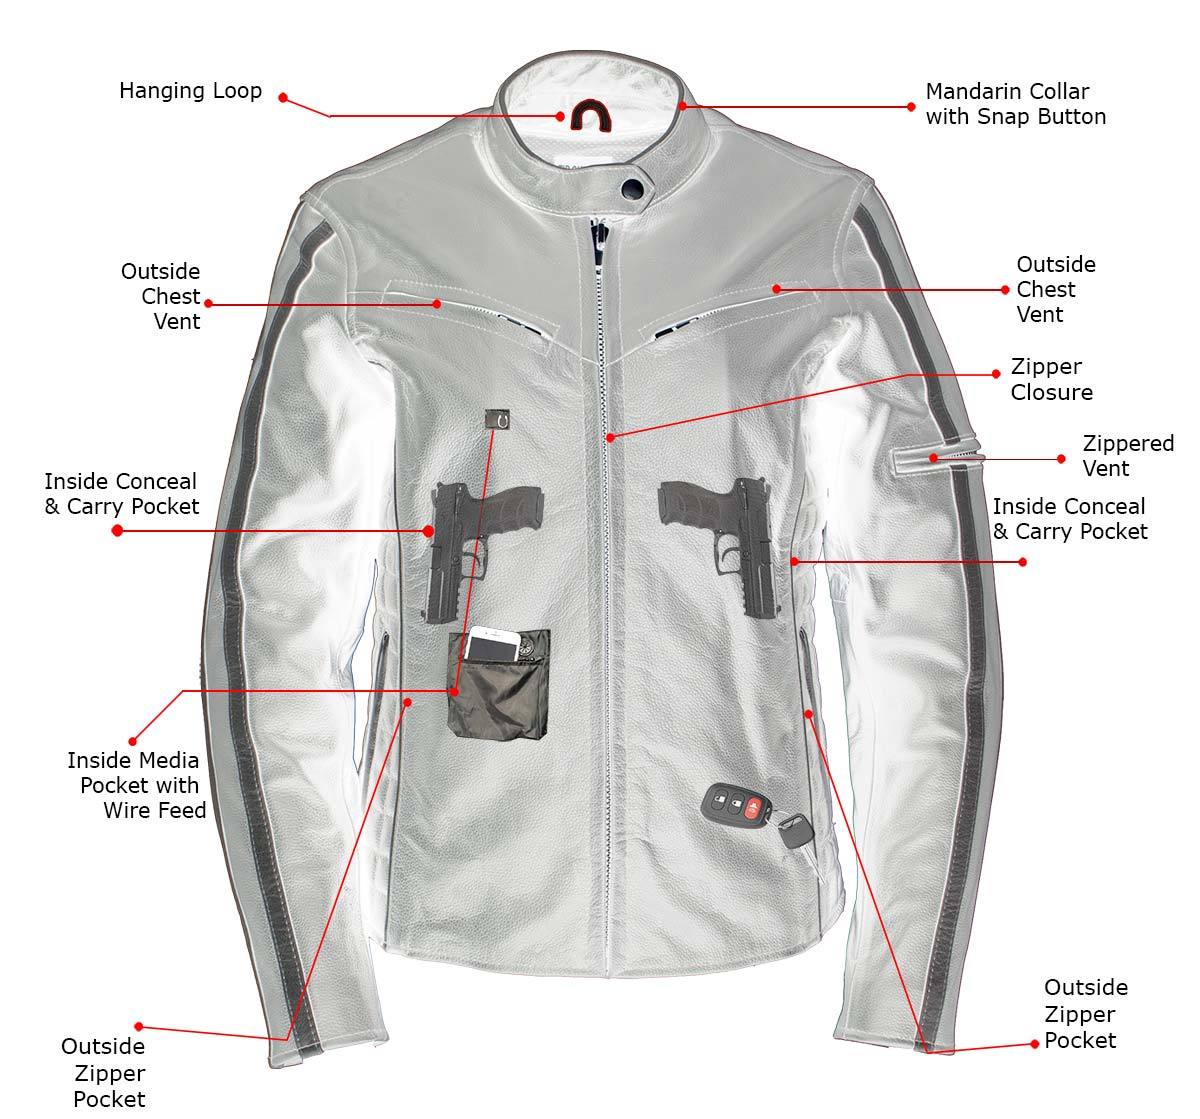 Xelement B7065 Women’s ‘Silver Fox’ Black with Silver Multi Vented Leather Motorcycle Jacket